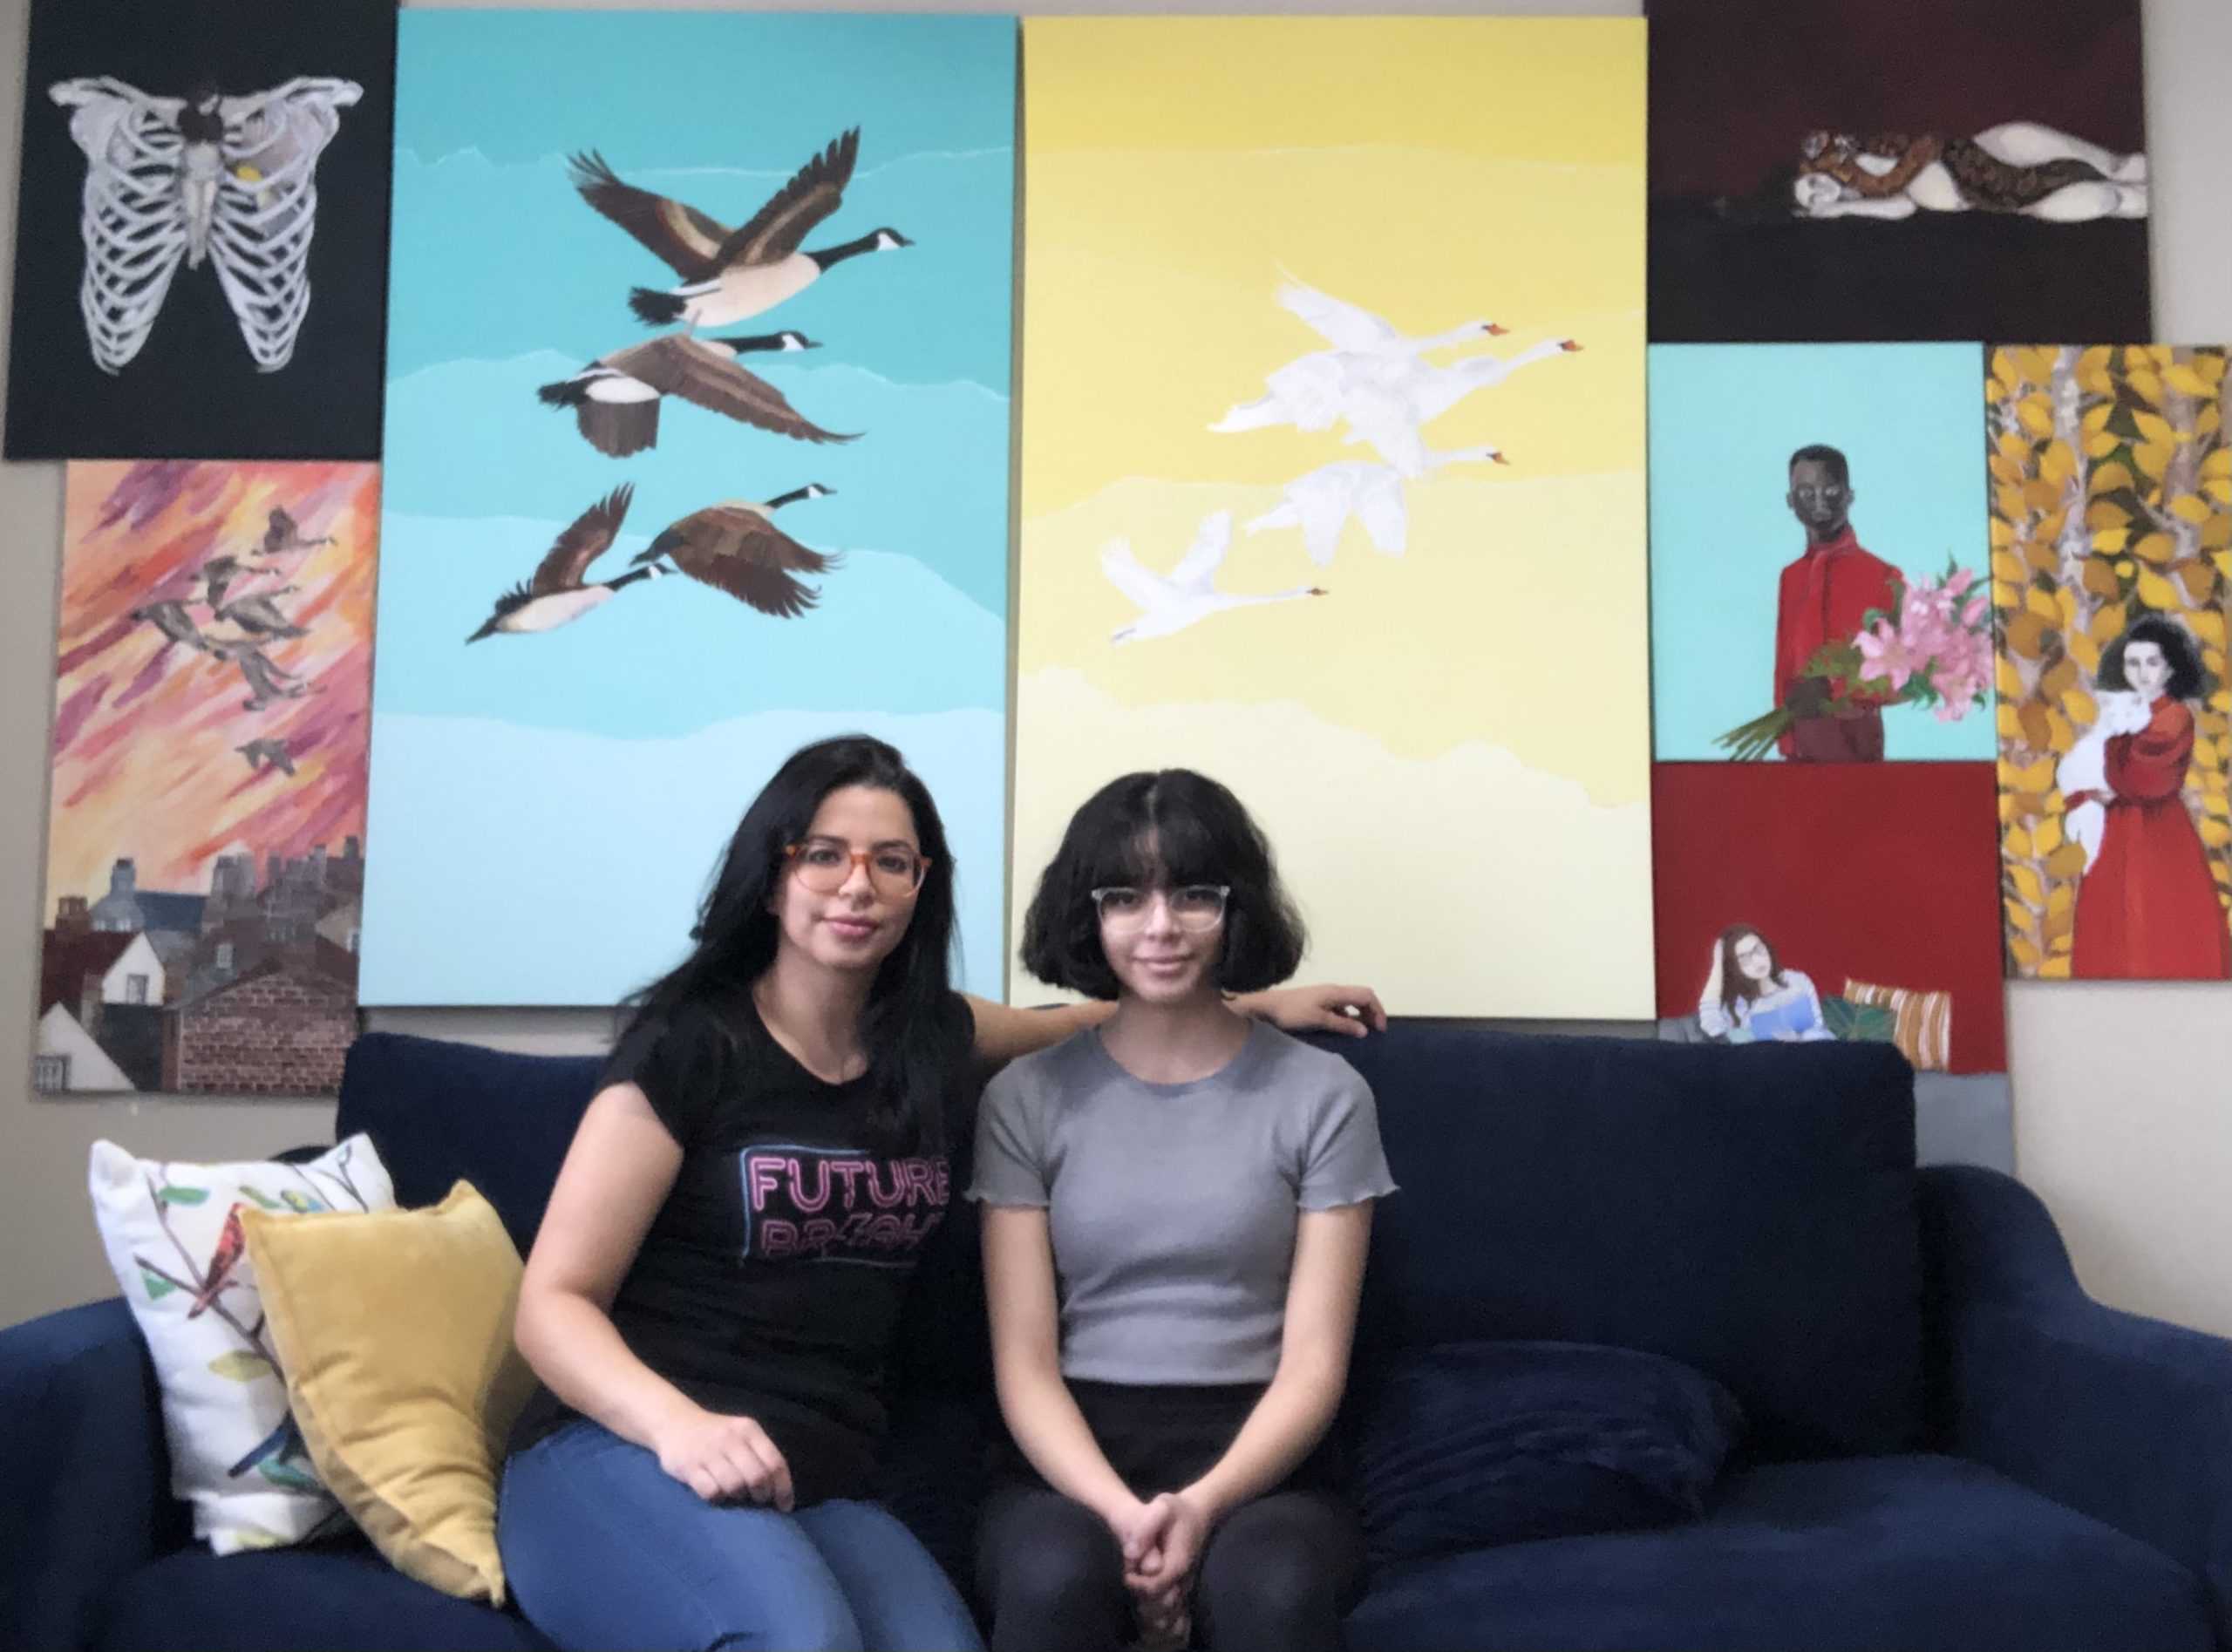 Fatima Matar (left) with her daughter, Jori, in their apartment in Ohio. Matar's artwork hangs behind them. (February, 2021) (Photo: Used with permission from Matar)